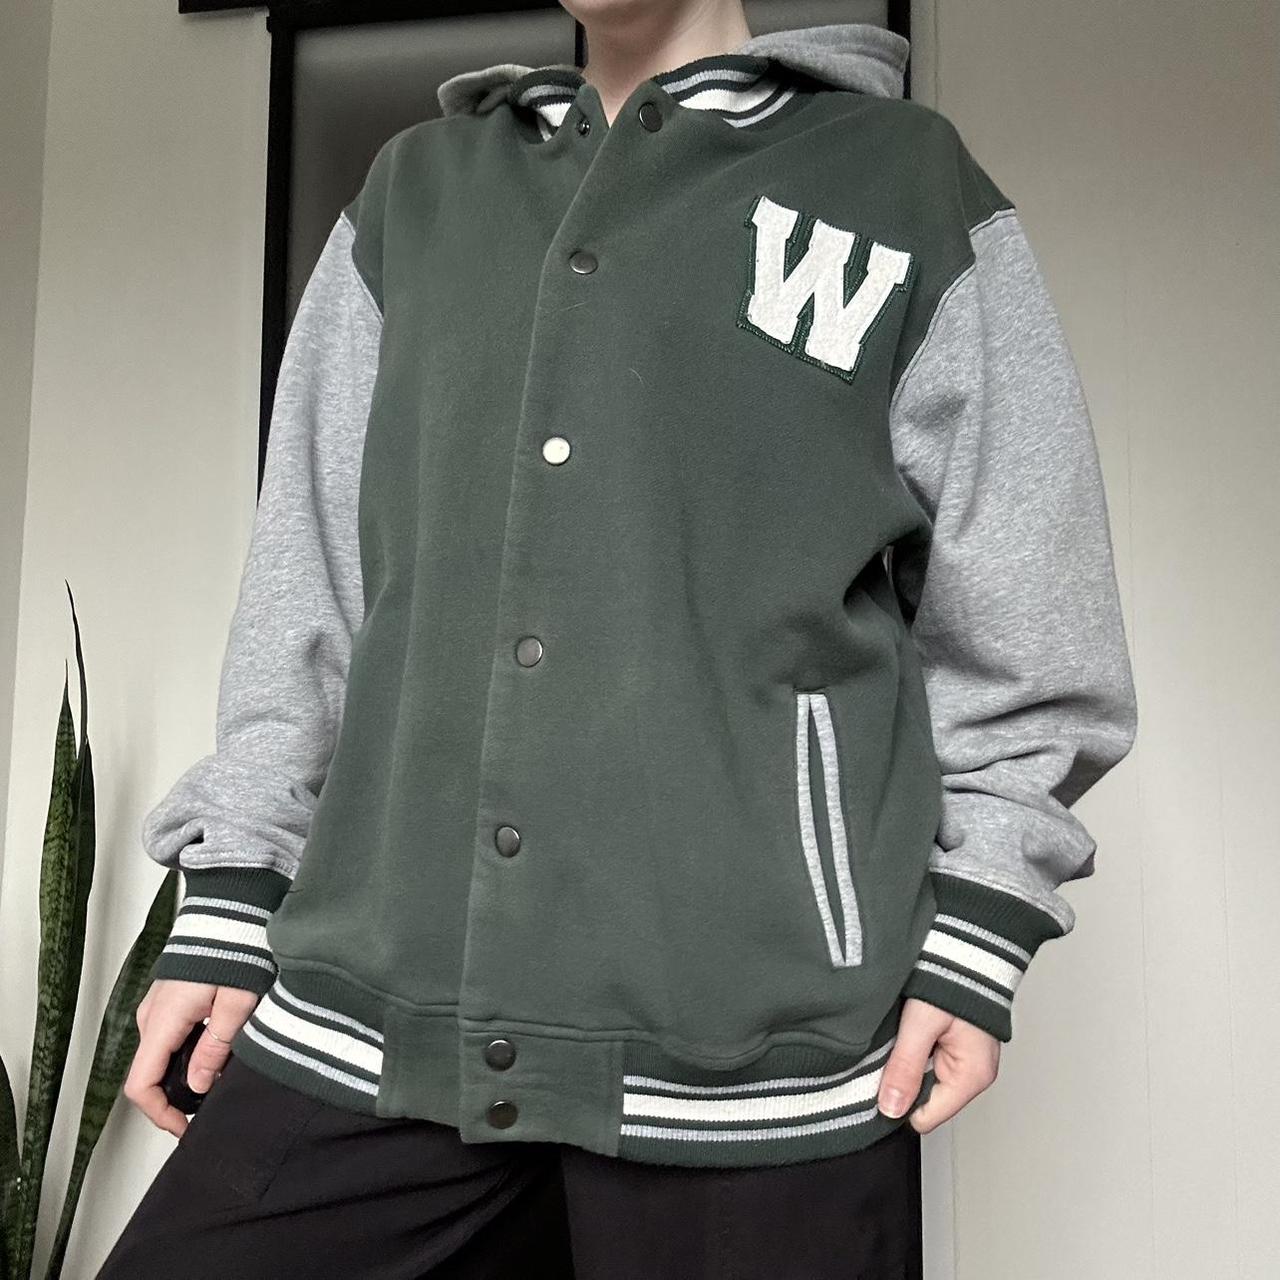 Women's Green and Grey Jacket (2)